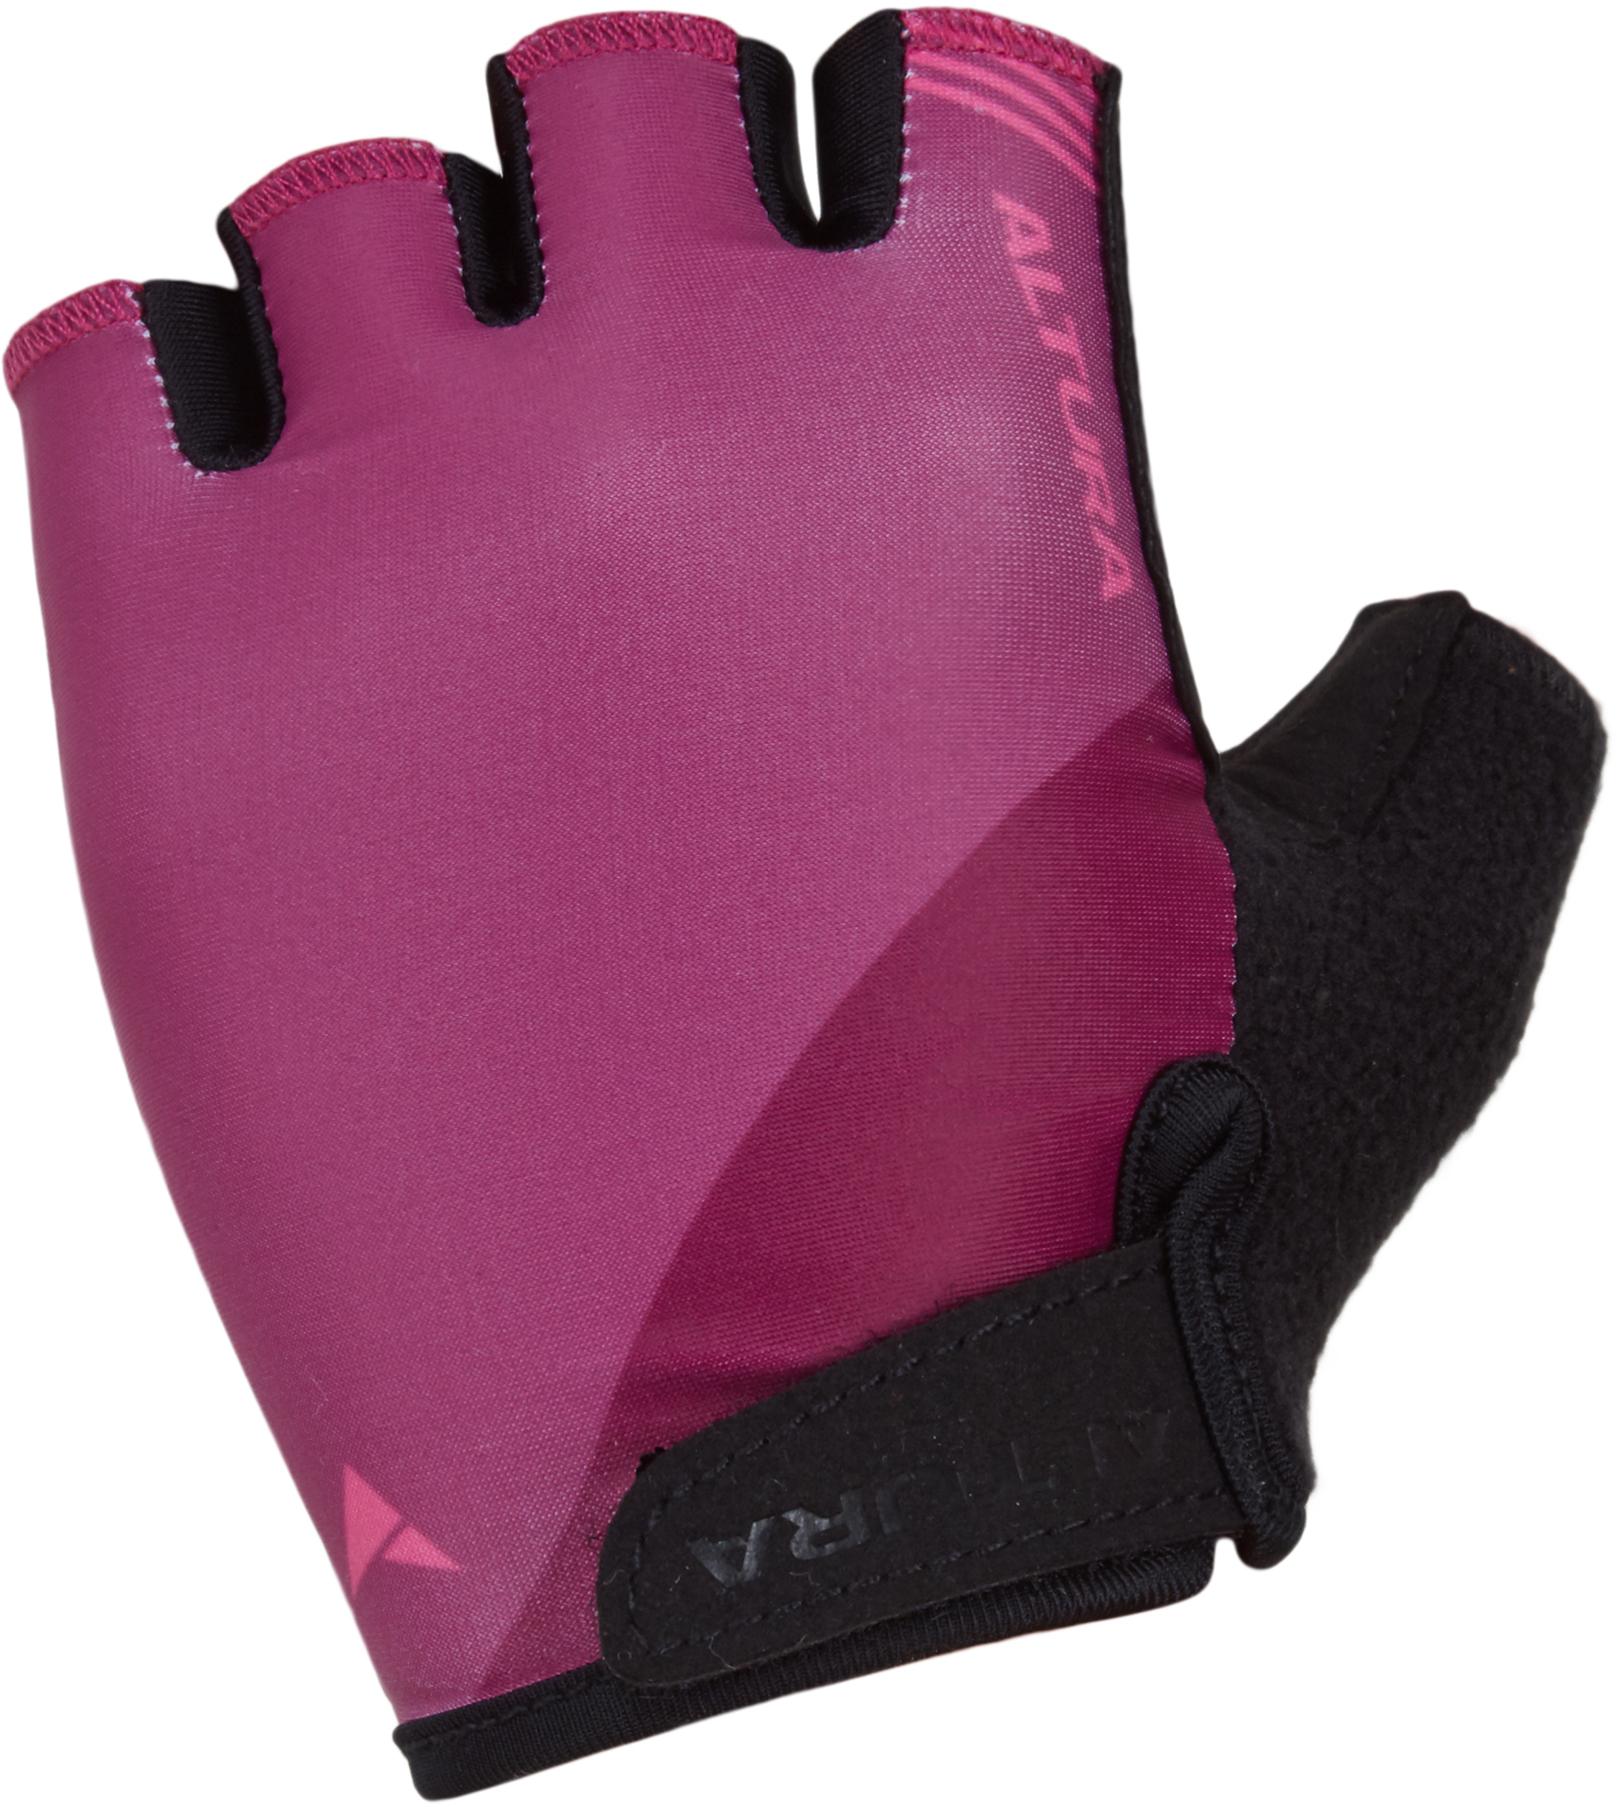 Altura Kids Airstream Cycling Gloves - Pink